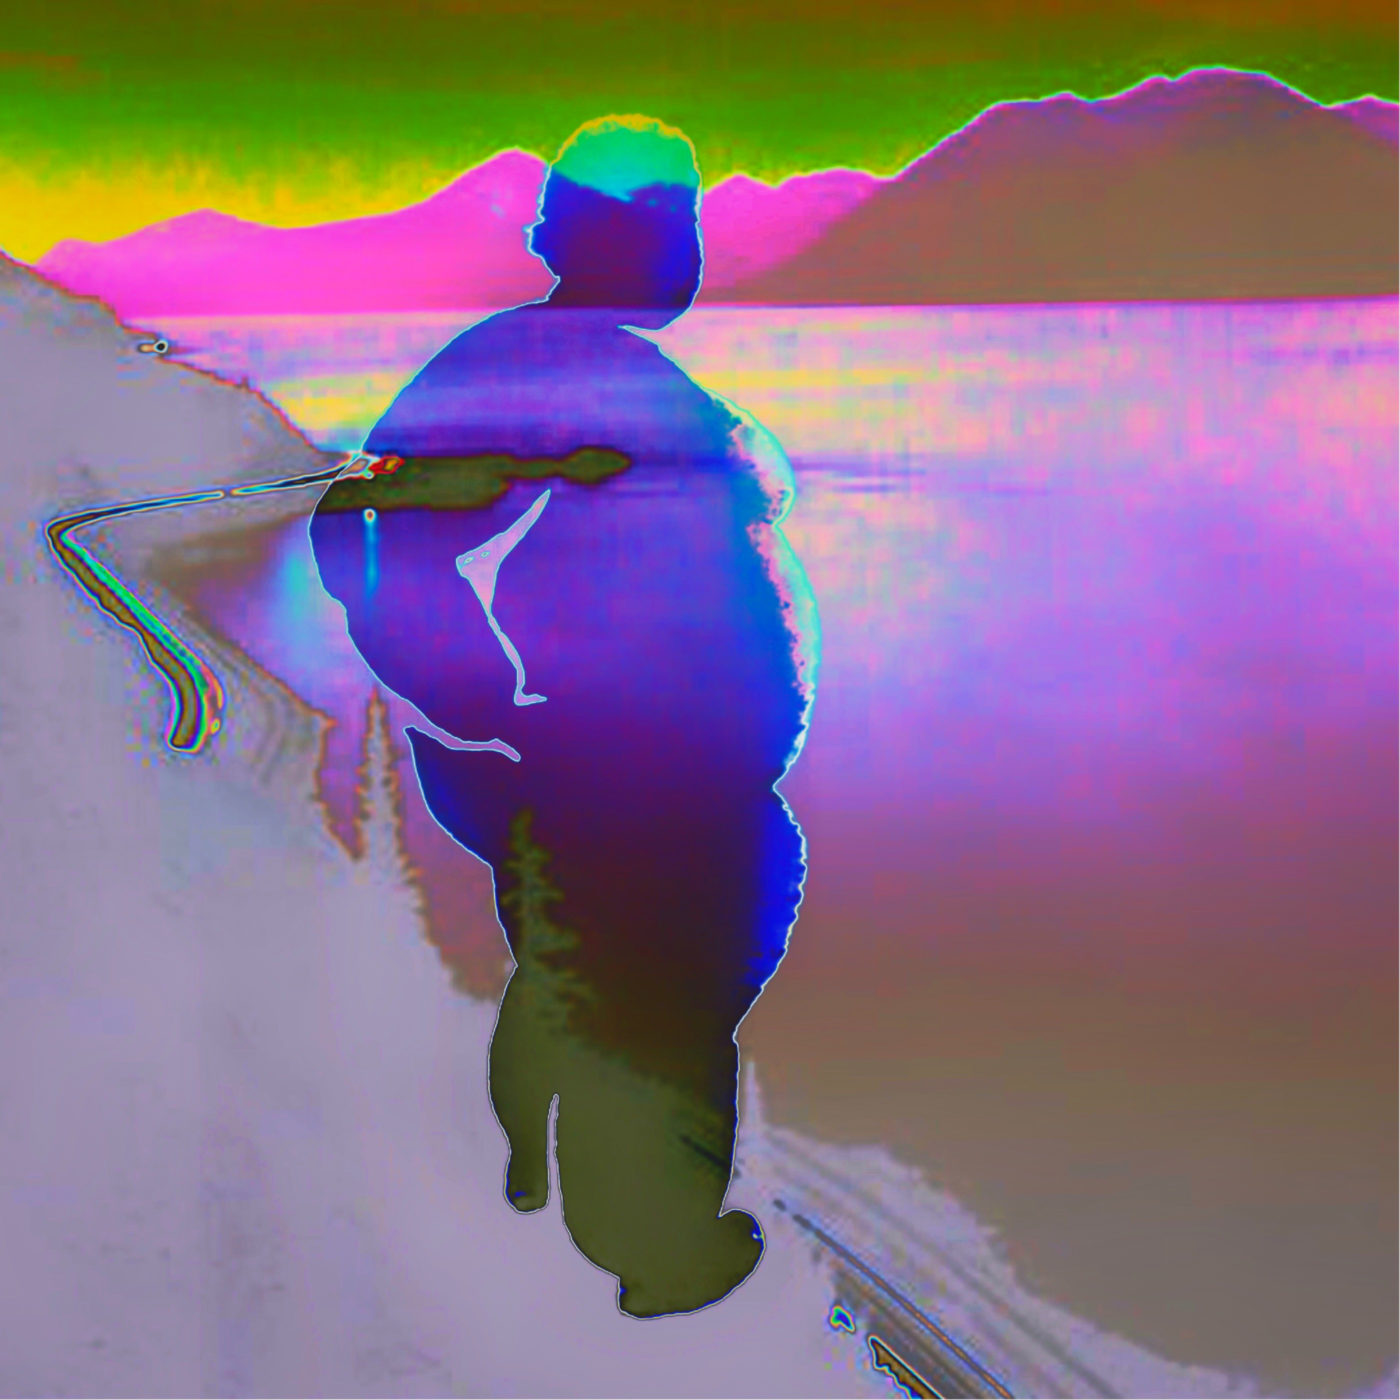 Digital art of a fat translucent silhouette overlaid on a bright false-color scene of a large river or lake with mountains in the background and a road twisting along the near shoreline.